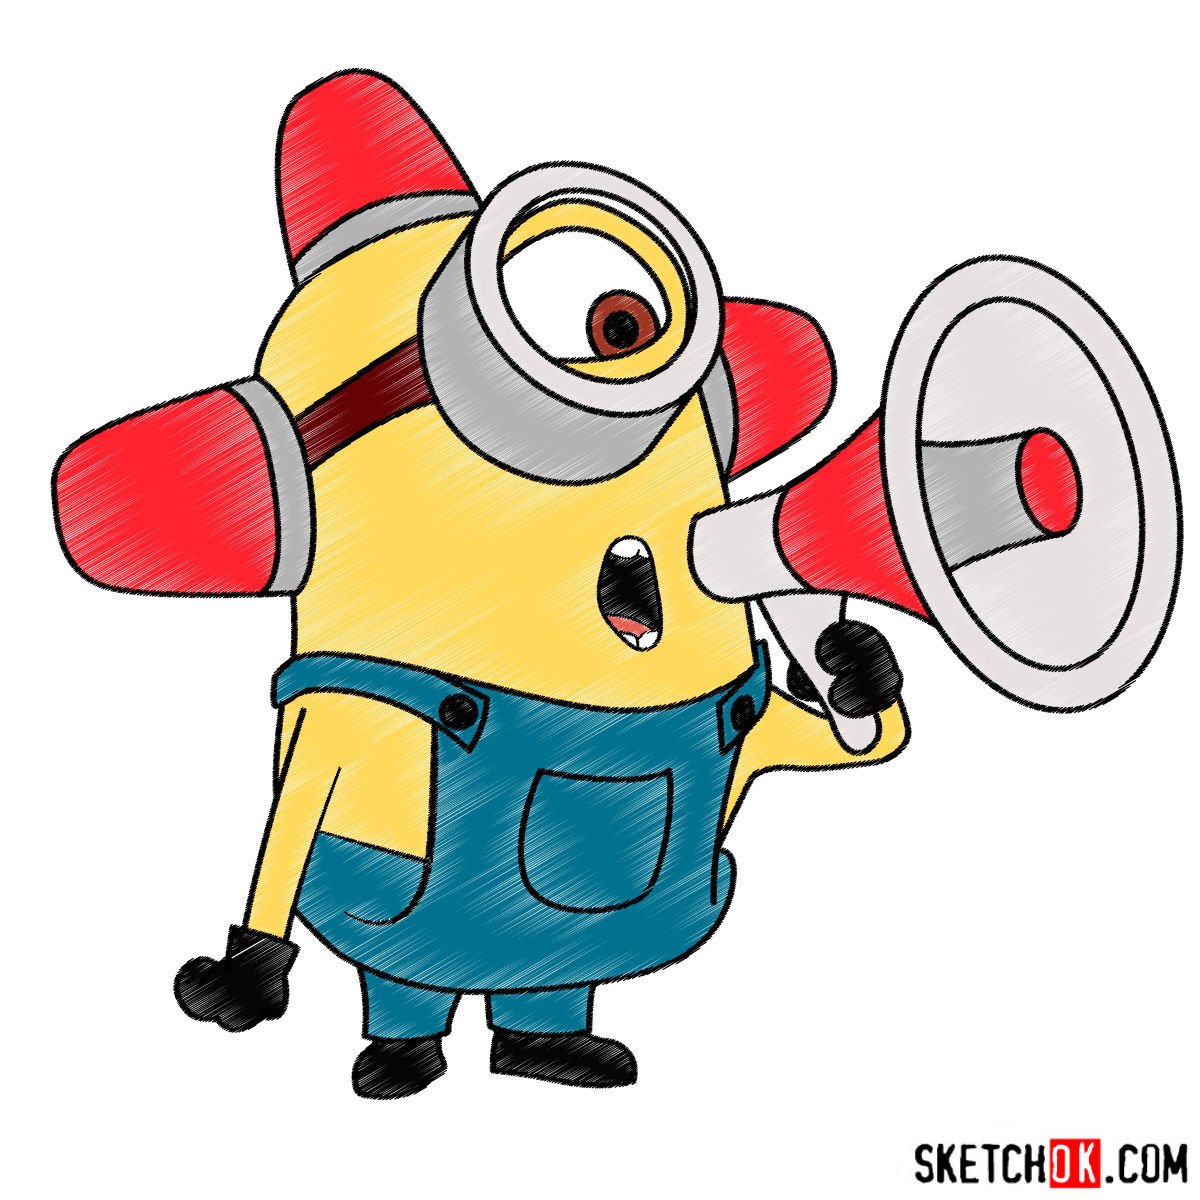 How to draw minion Carl with a loudspeaker - Sketchok easy drawing guides